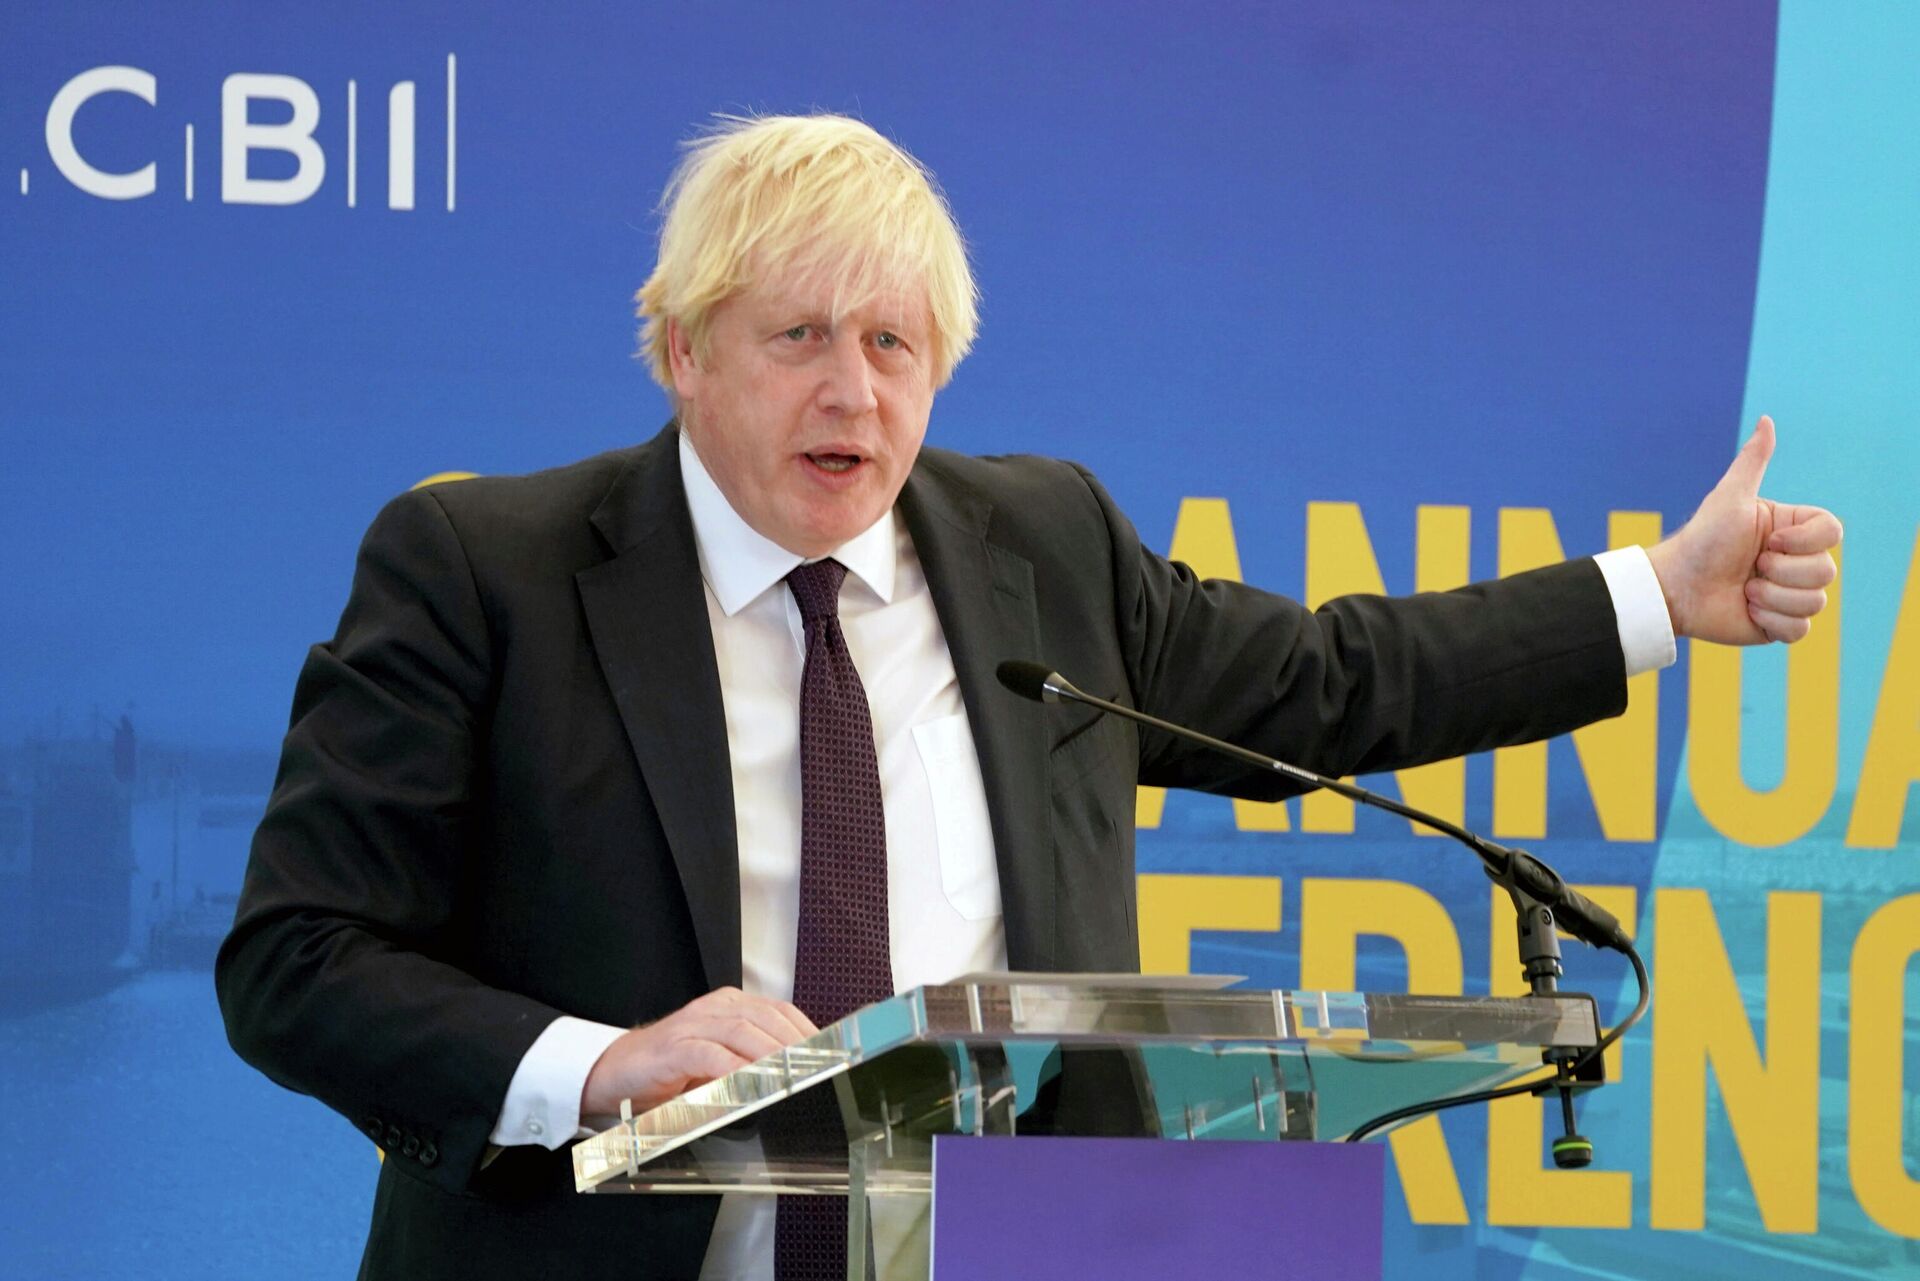 Prime Minister Boris Johnson speaks during the CBI (Confederation of British Industry) annual conference, at the Port of Tyne, in South Shields, England, Monday Nov. 22, 2021.  - Sputnik International, 1920, 24.11.2021